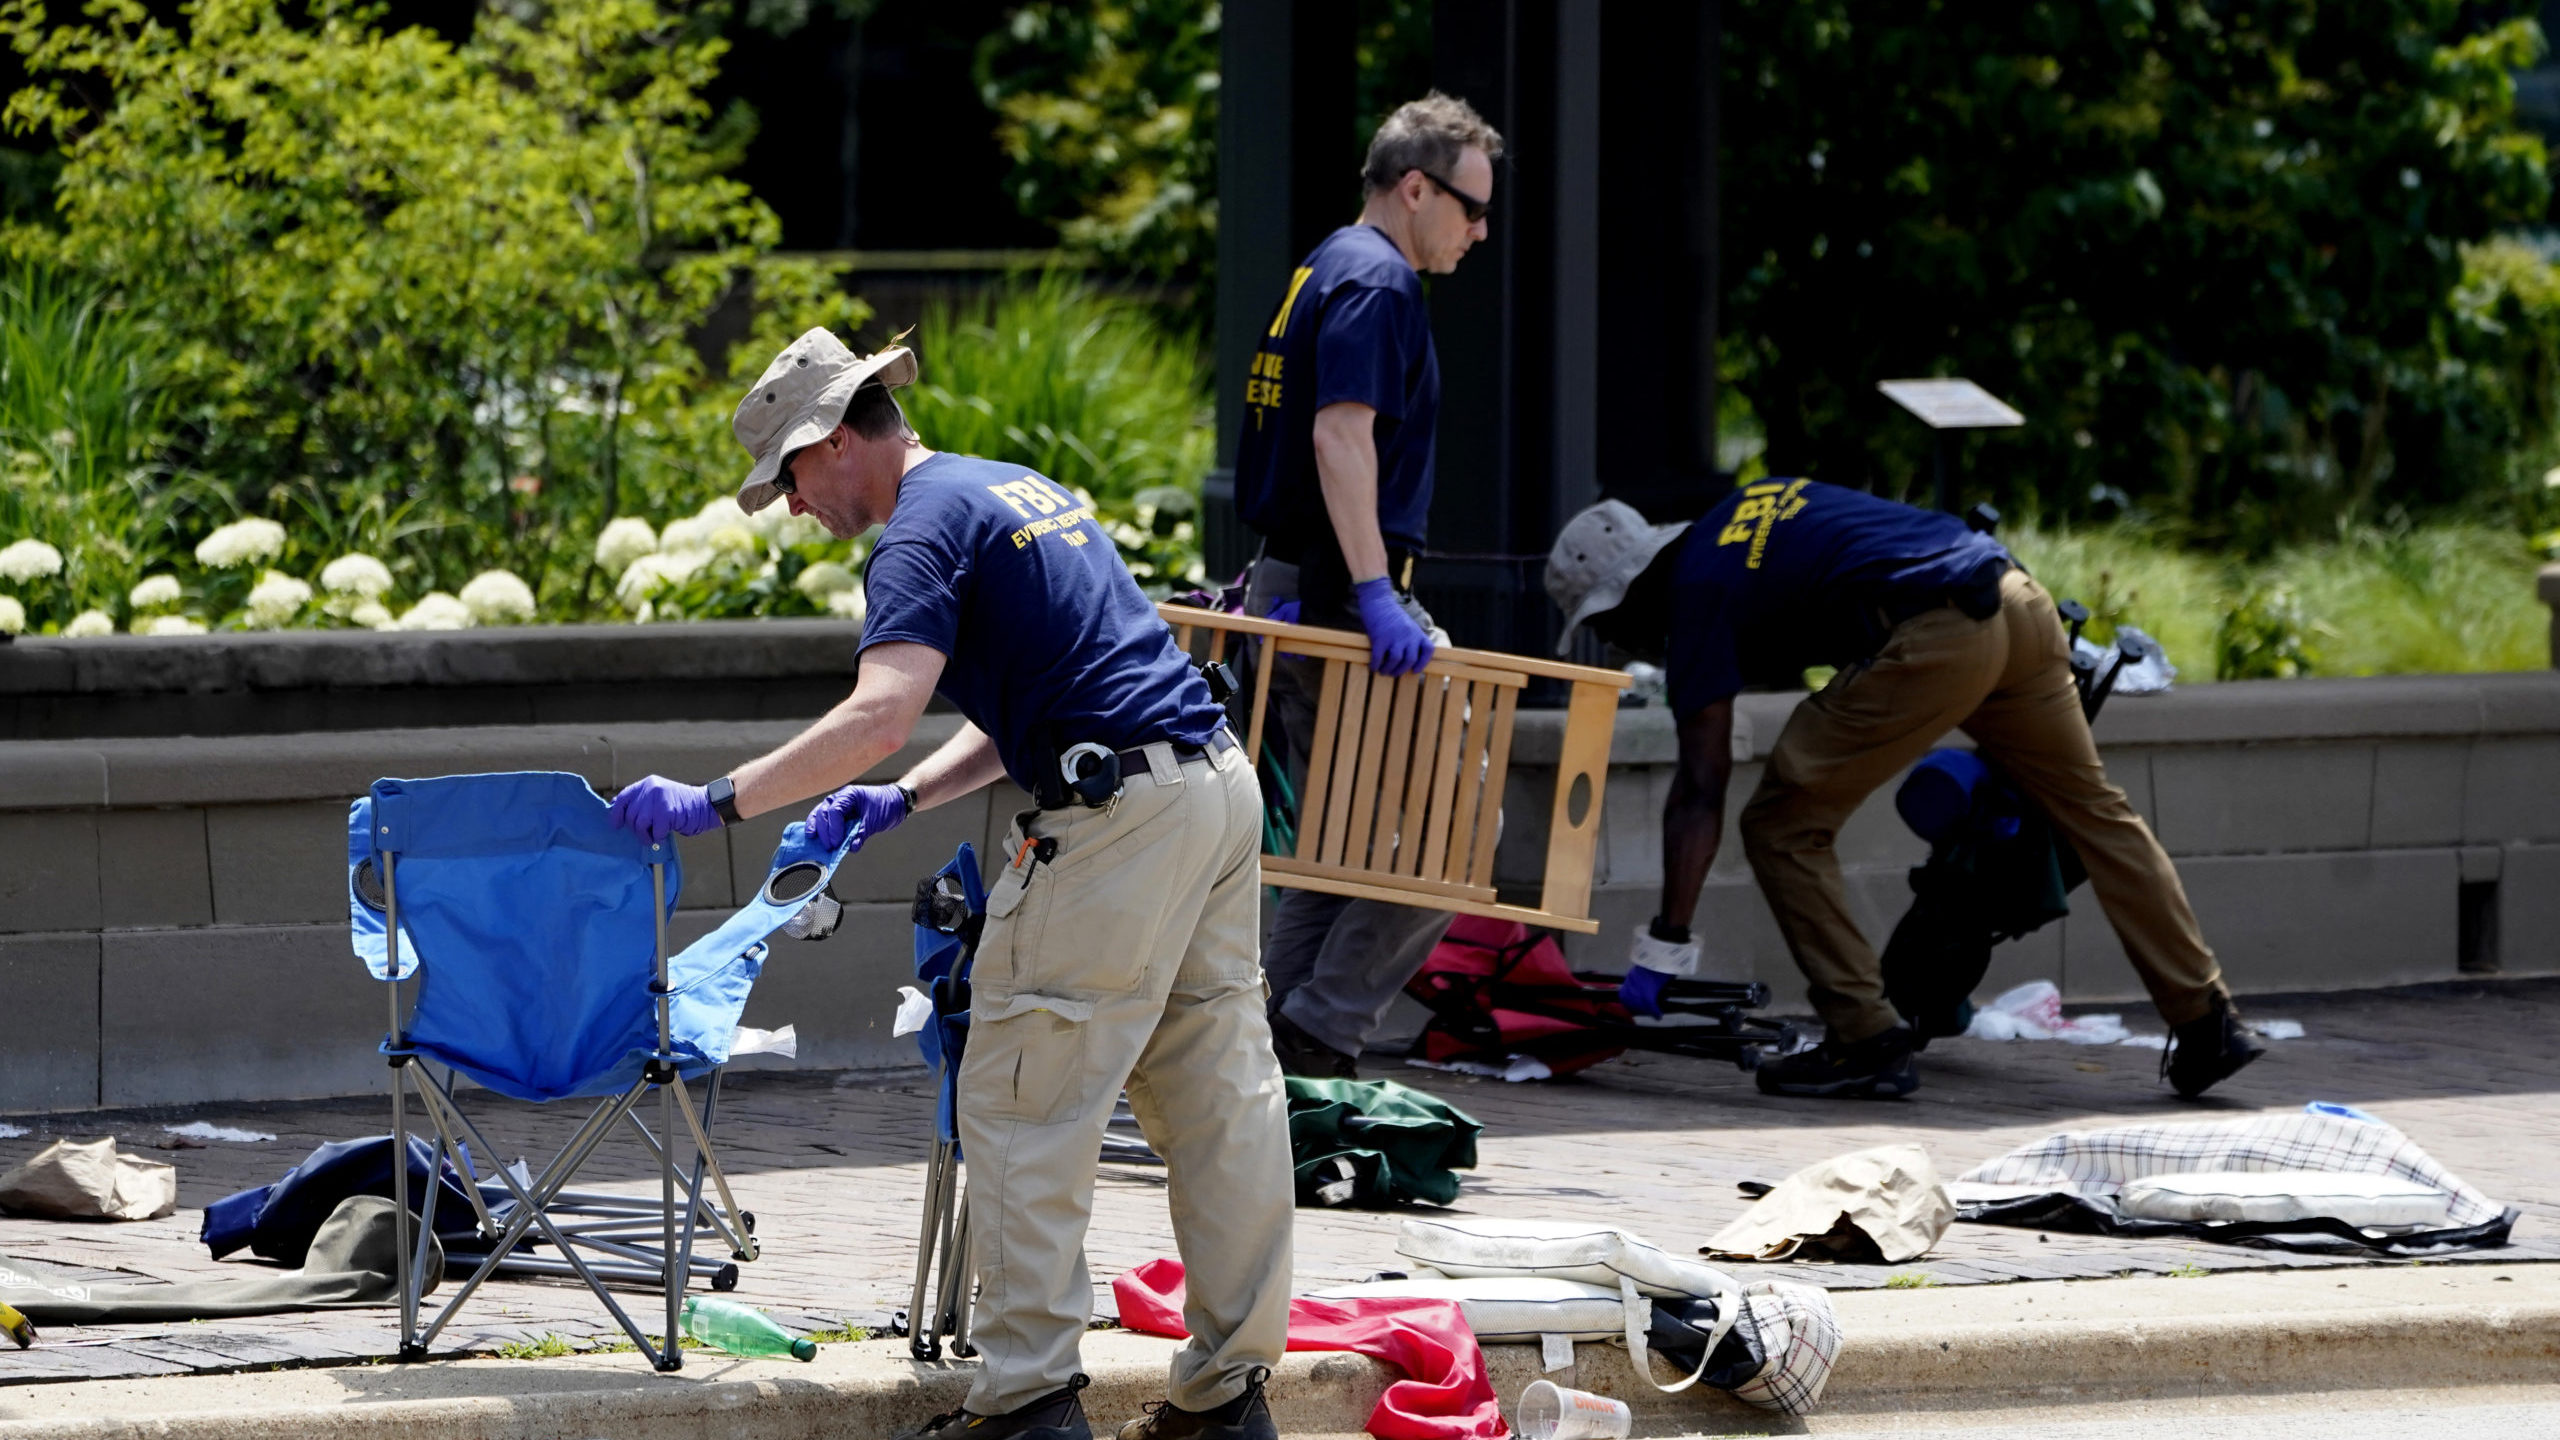 Two members of the FBI move items from the scene at the Highland Park shooting...